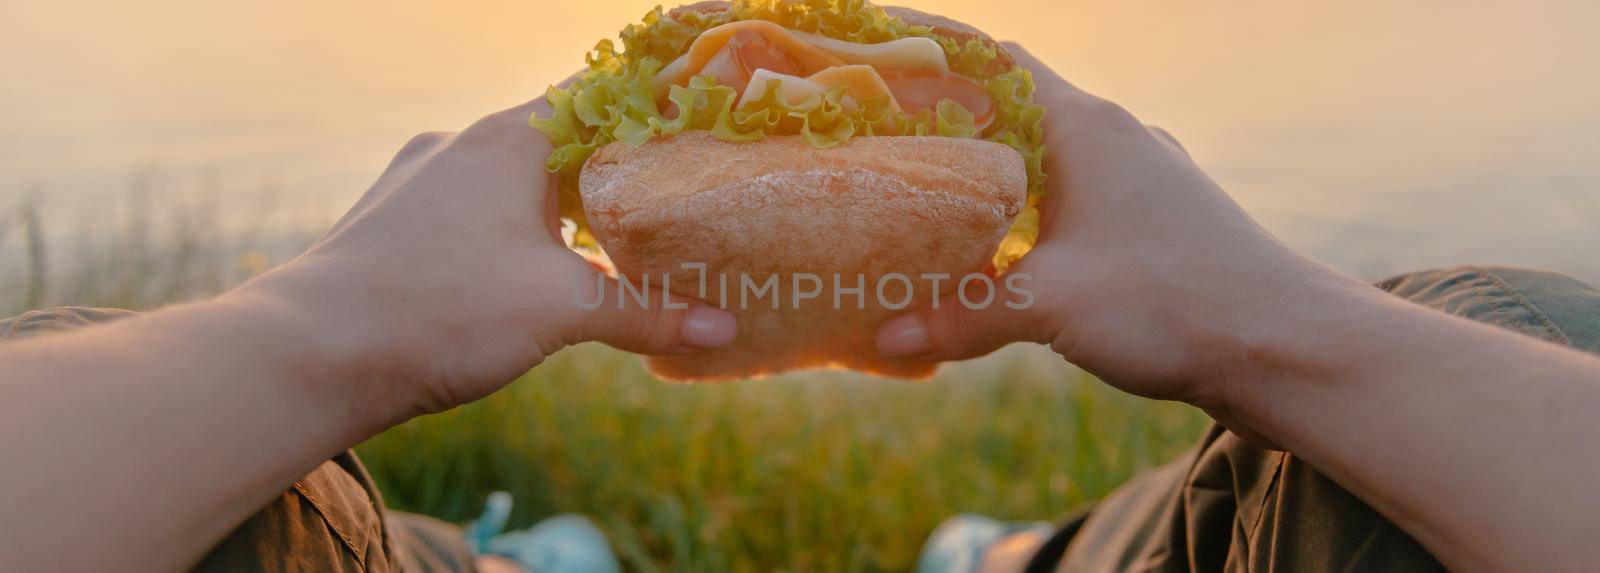 Woman holding burger sandwich while resting on nature, point of view. by alexAleksei